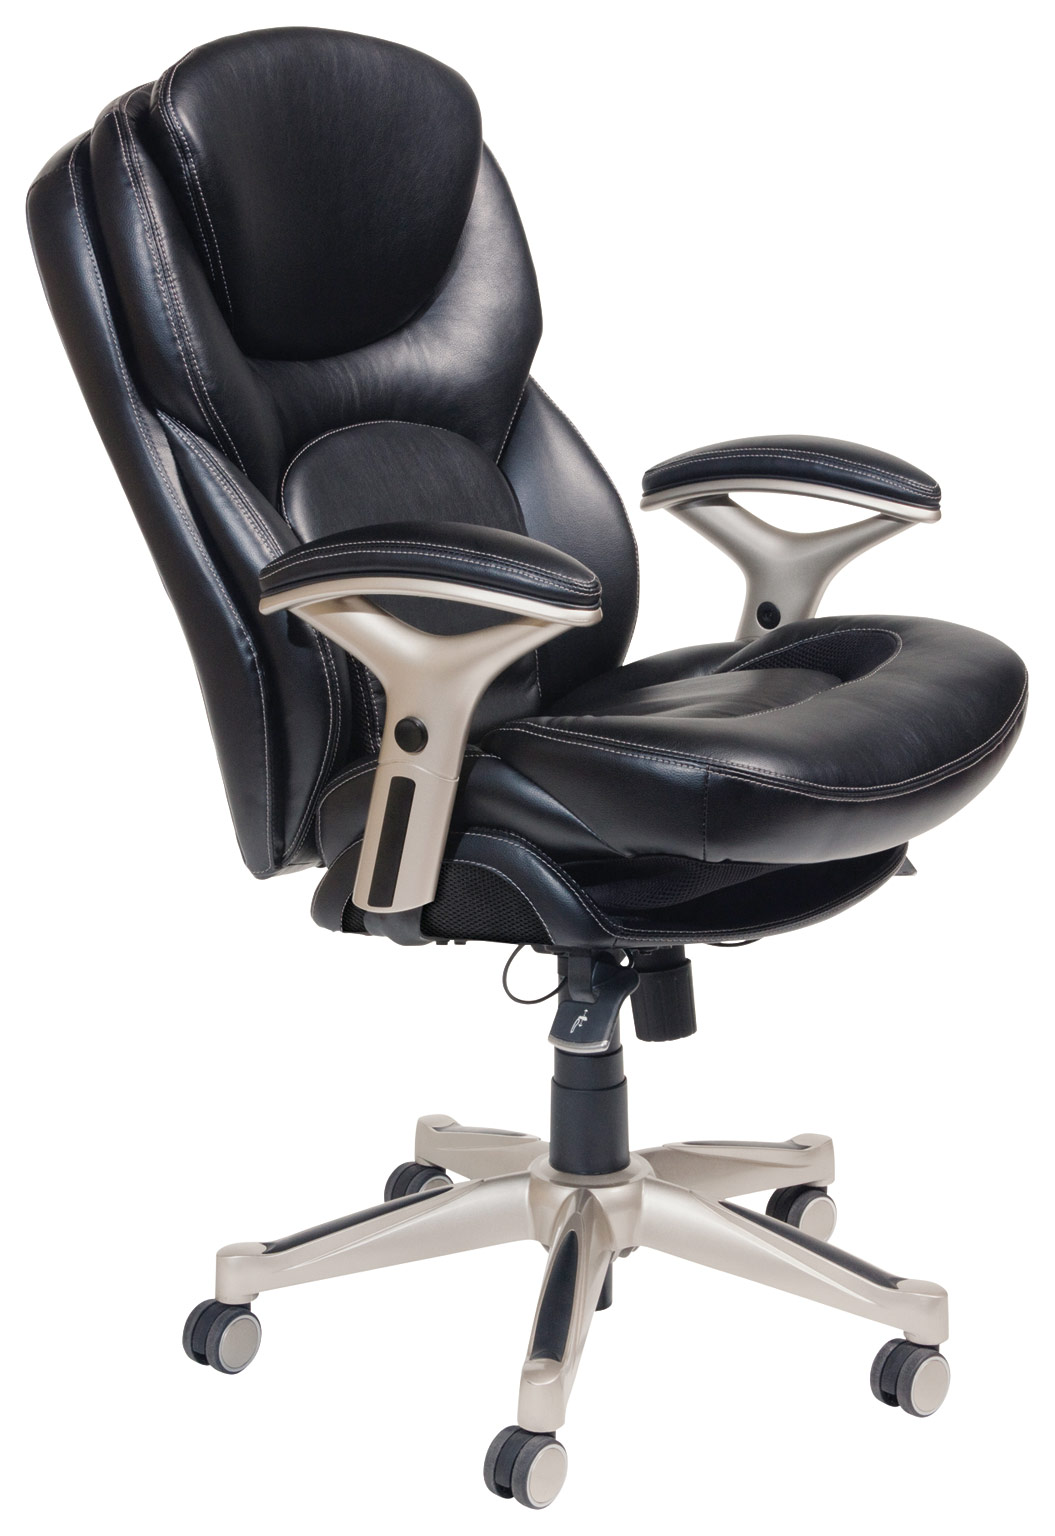 Angle View: Serta - Essentials Mesh & Faux Leather Task Chair - Black